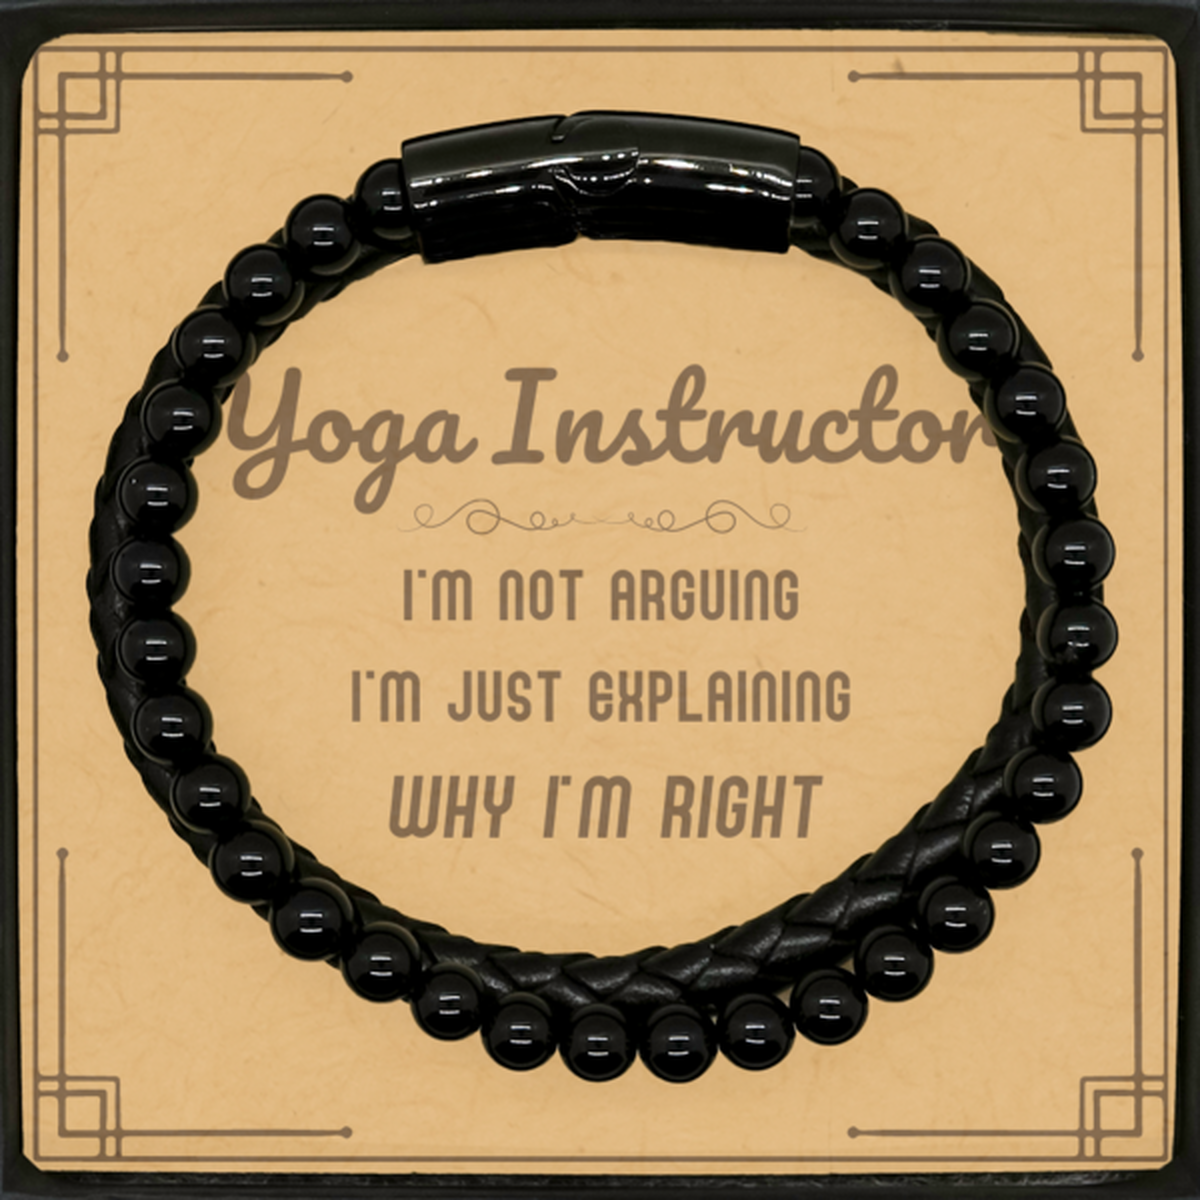 Yoga Instructor I'm not Arguing. I'm Just Explaining Why I'm RIGHT Stone Leather Bracelets, Funny Saying Quote Yoga Instructor Gifts For Yoga Instructor Message Card Graduation Birthday Christmas Gifts for Men Women Coworker